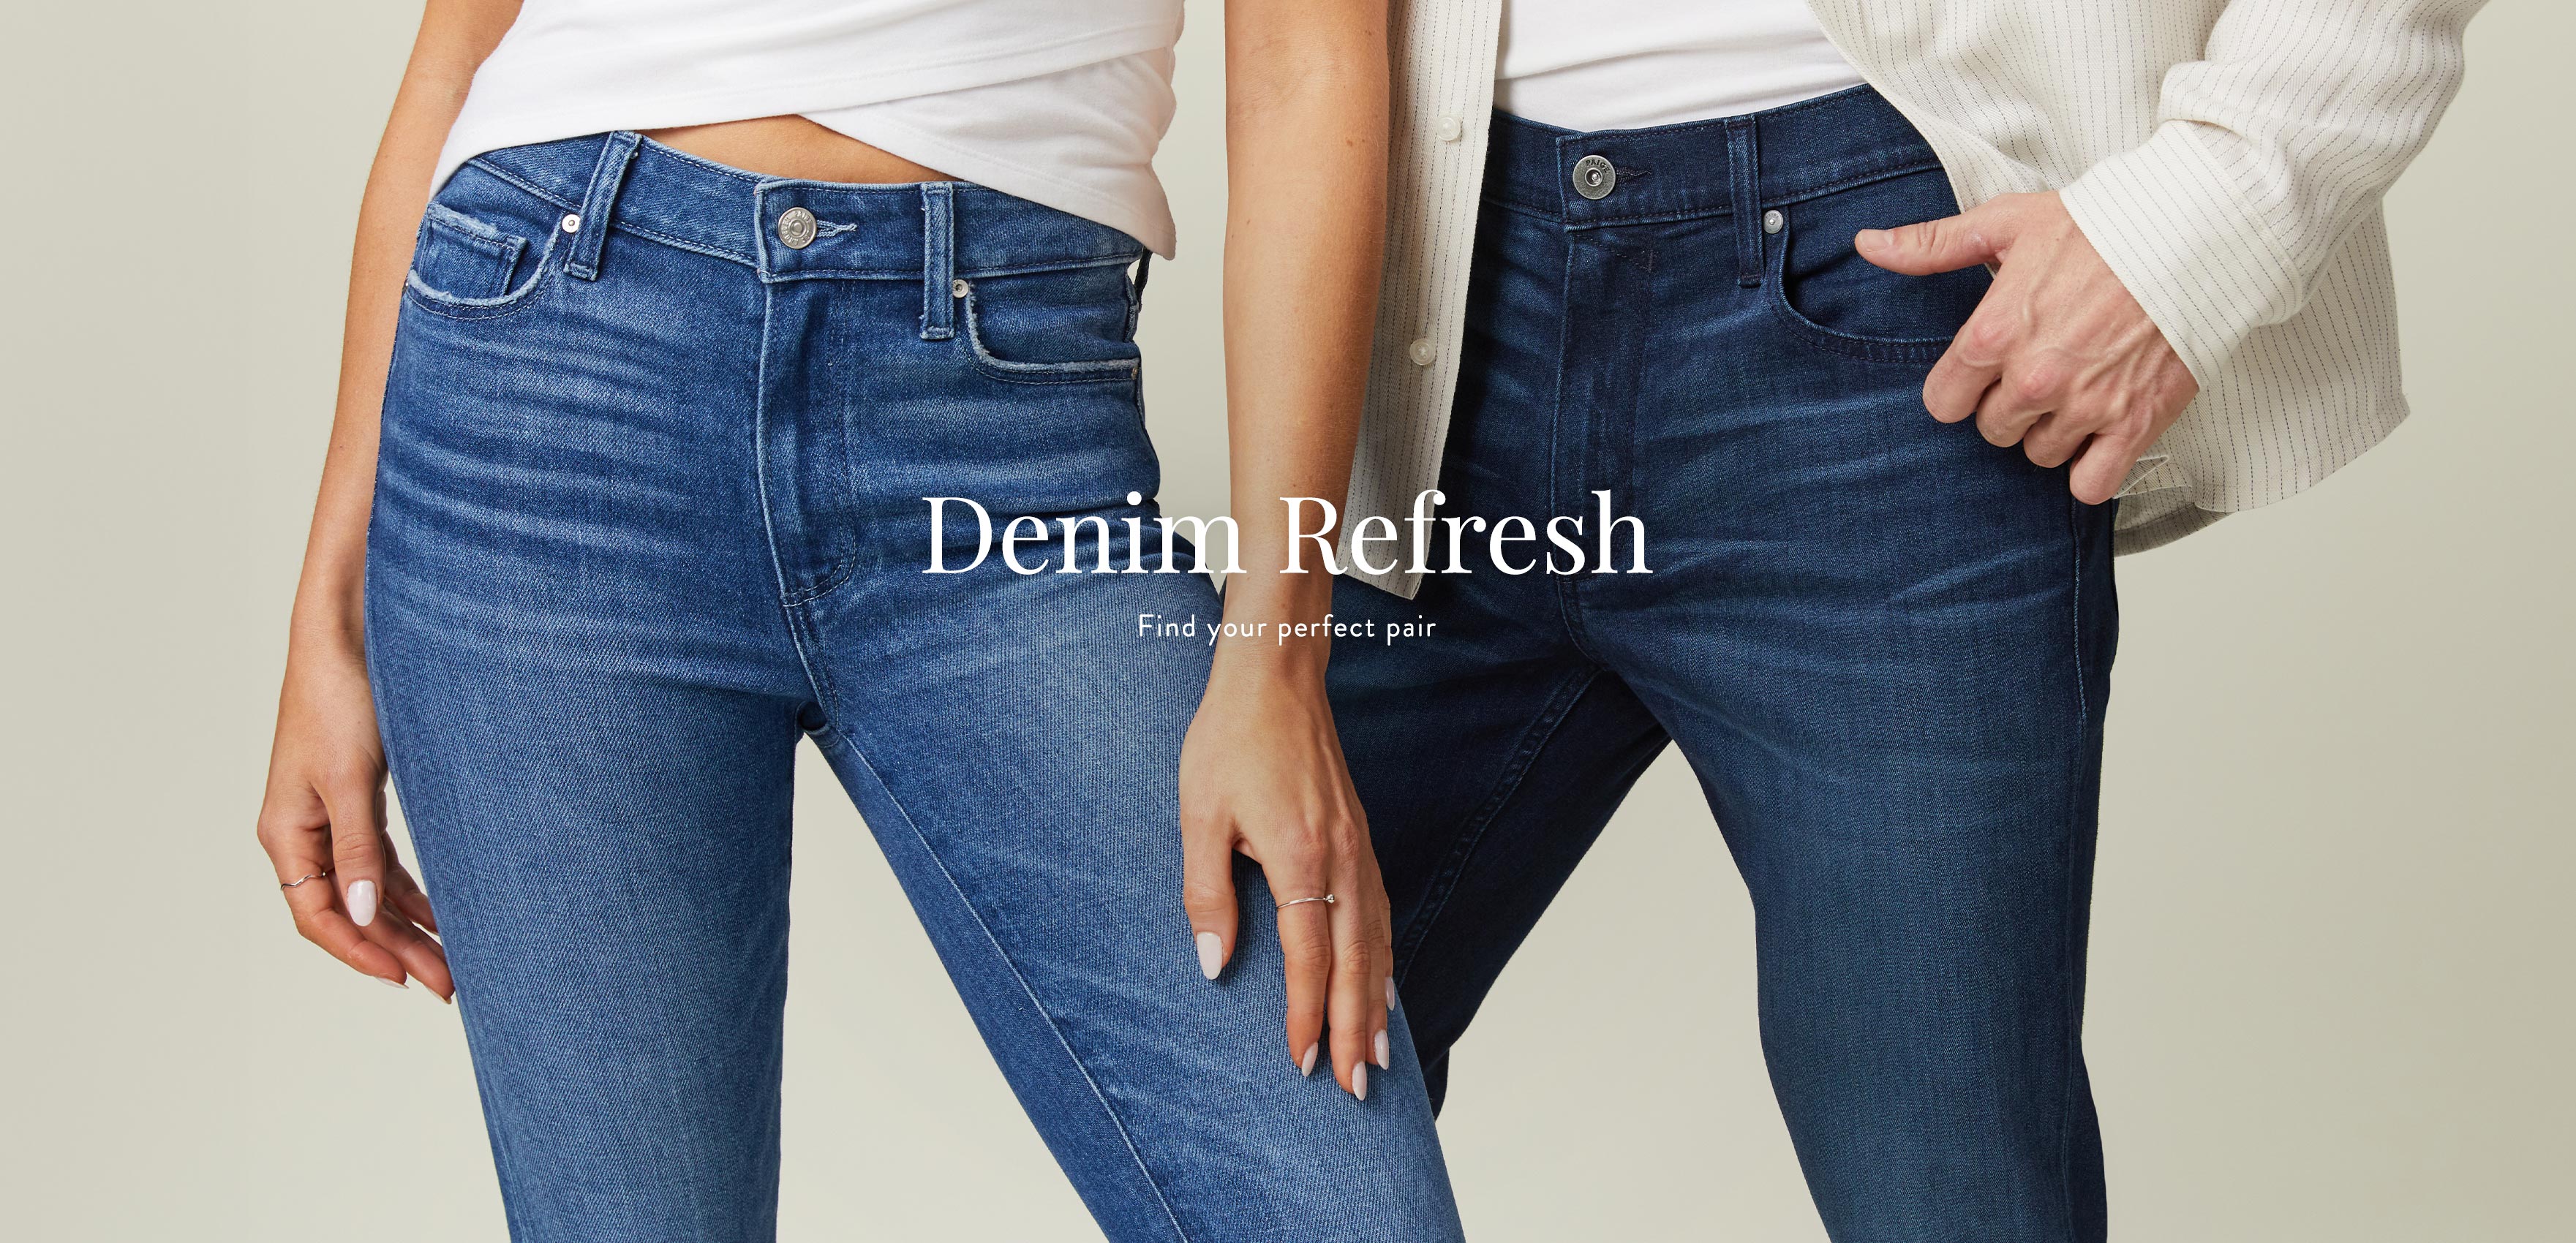 Detail shot of man and woman standing next to each other wearing different shades of blue denim jeans